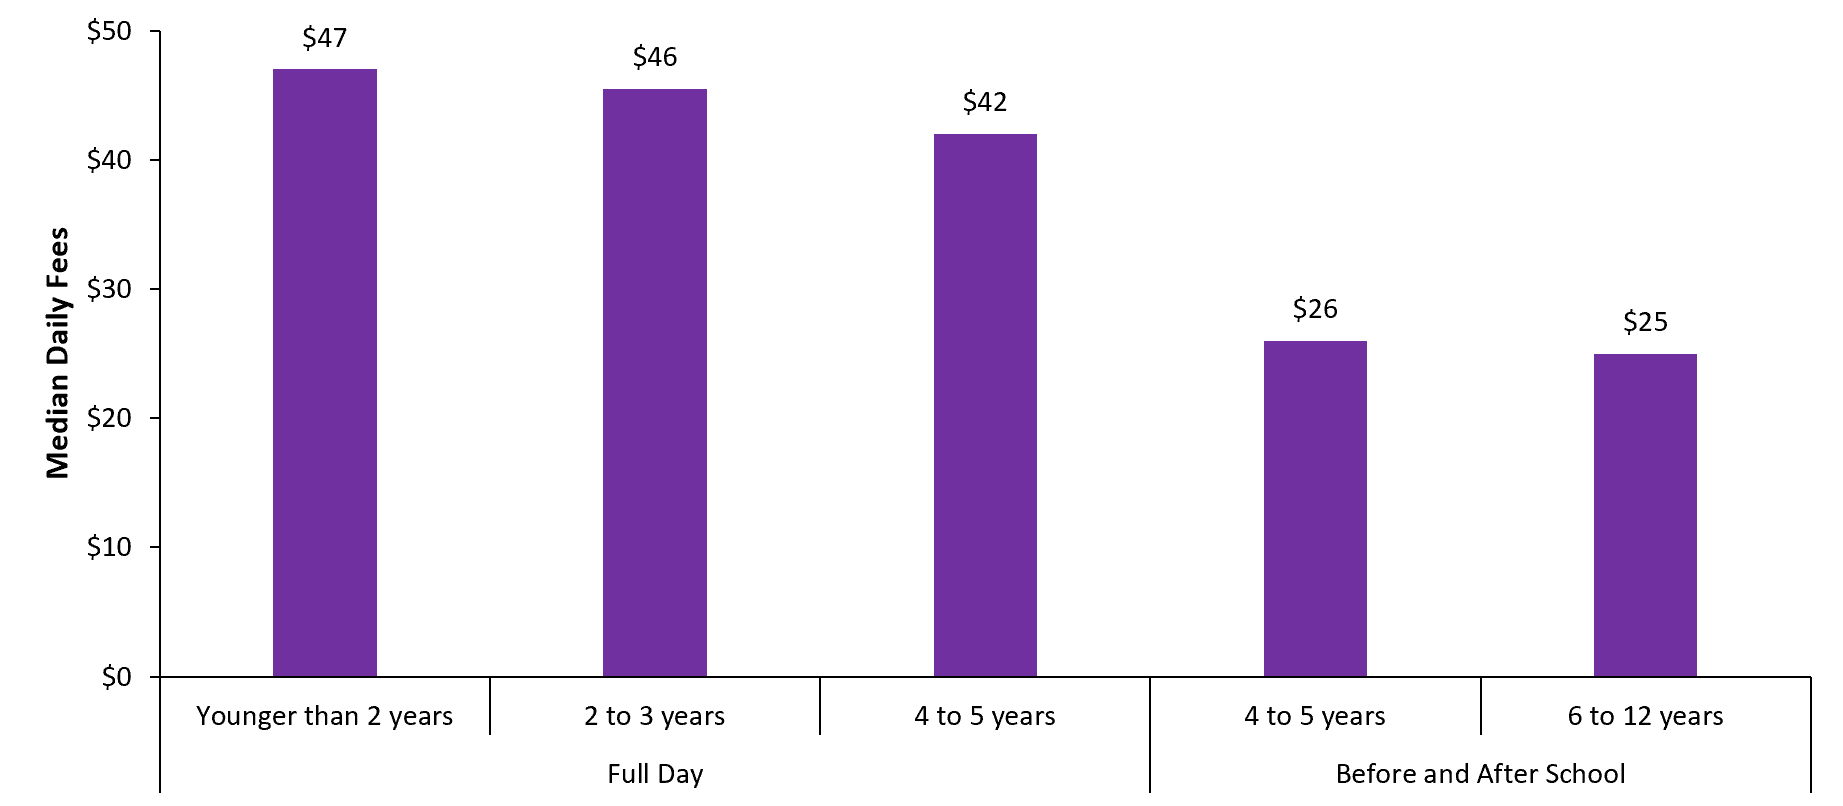 Median daily fees by age group among licensed home child care agencies, 2021